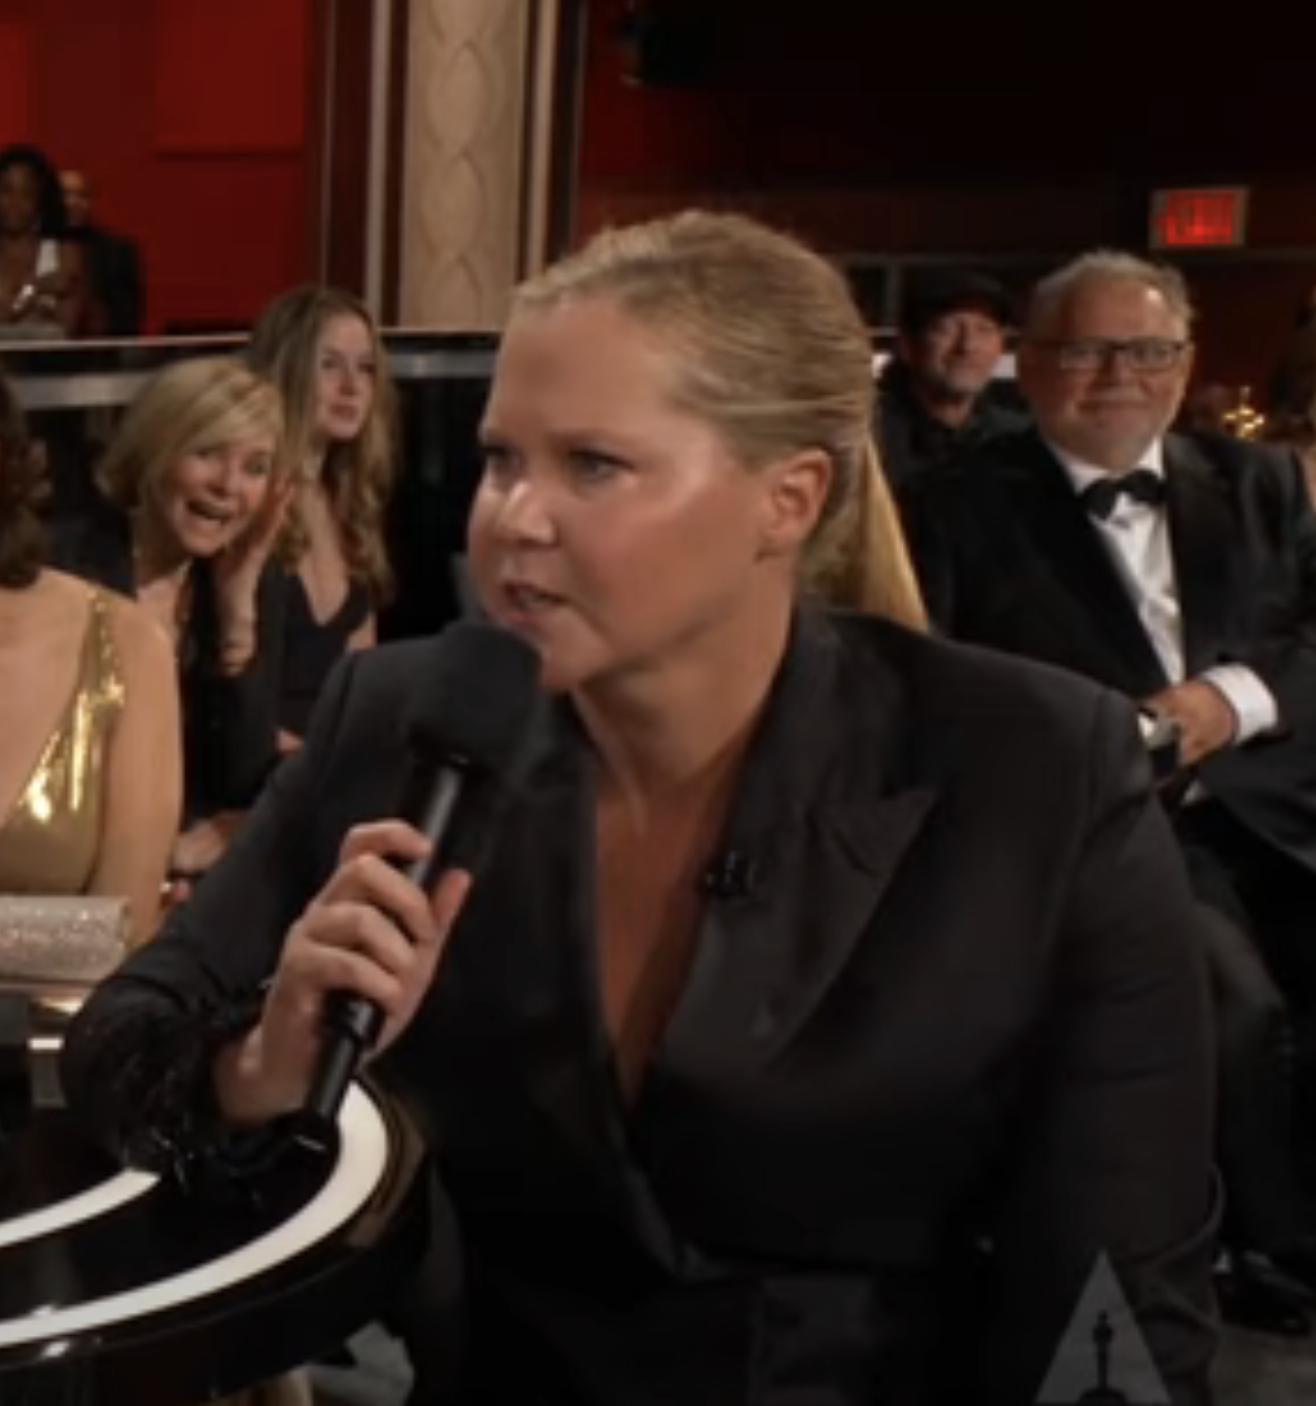 Amy Schumer speaks into a microphone at an event with audience in background